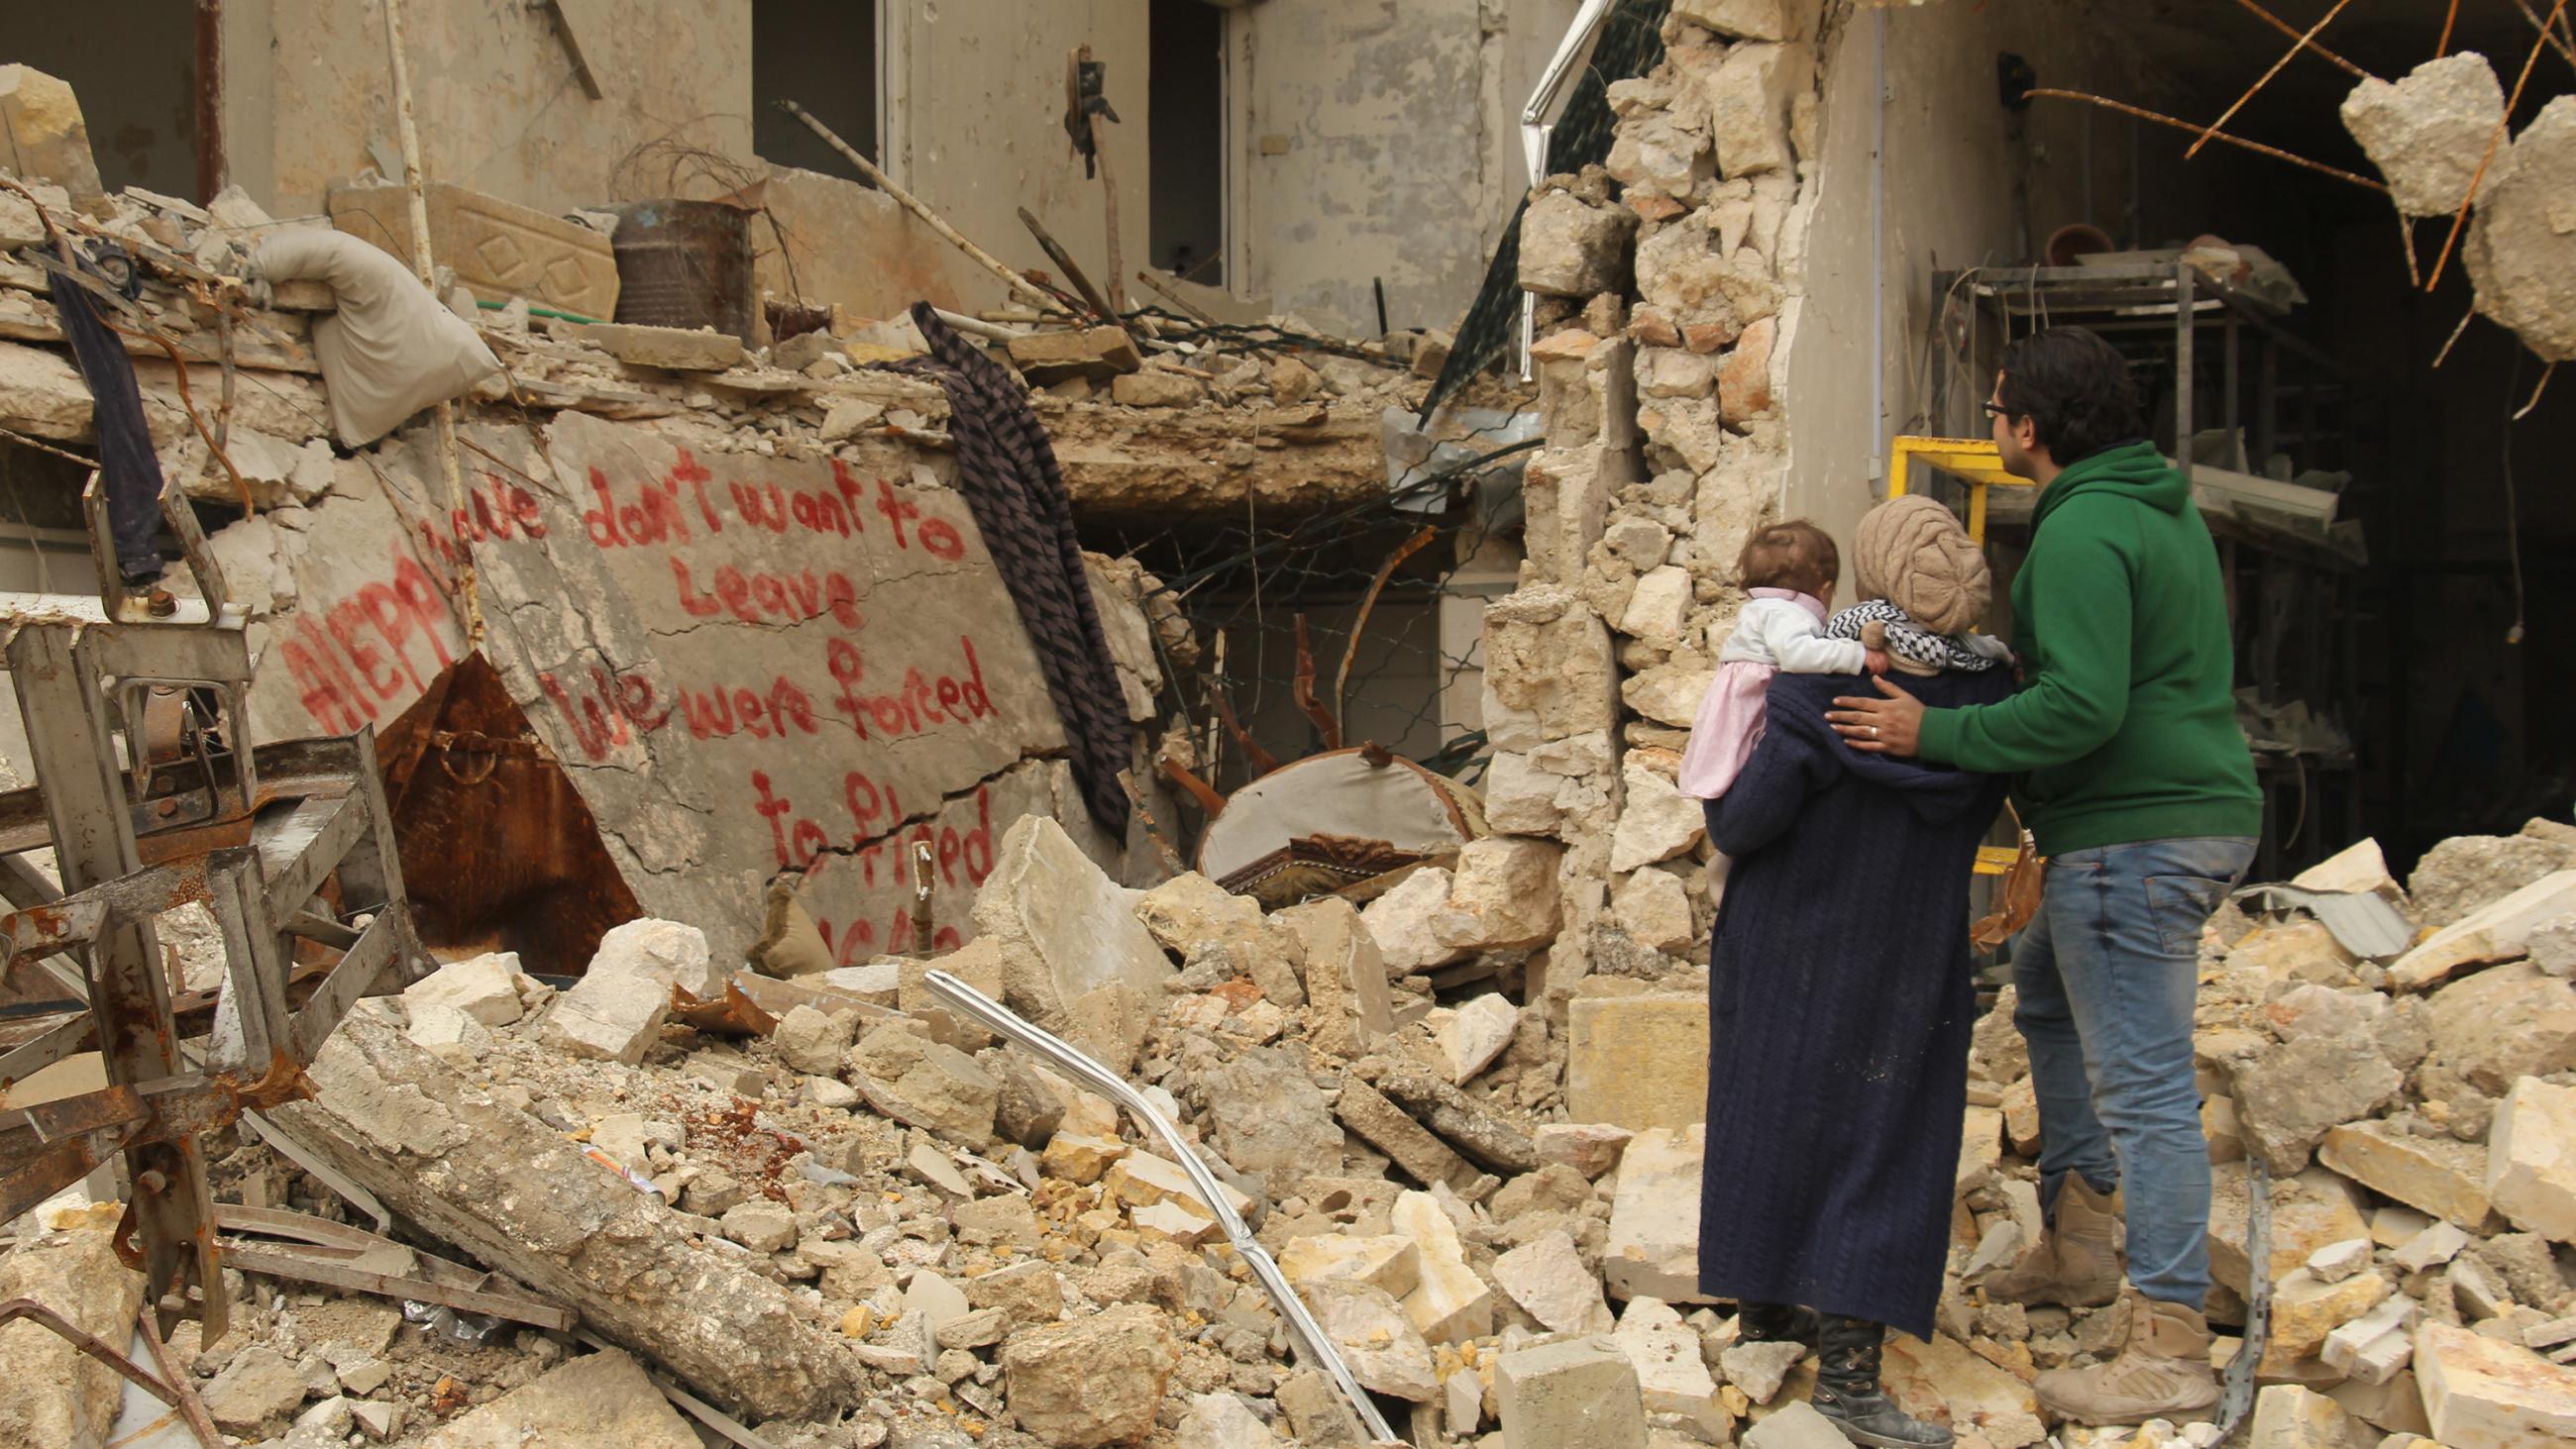 The picture shows the filmmaker holding her baby with her husband at her side. They are standing on top of rubble in front of a bombed-out building with twisted metal exposed and walls crumbled. Spray paint on a wall nearby reads, “We don’t want to leave / we were forced to flee.” 